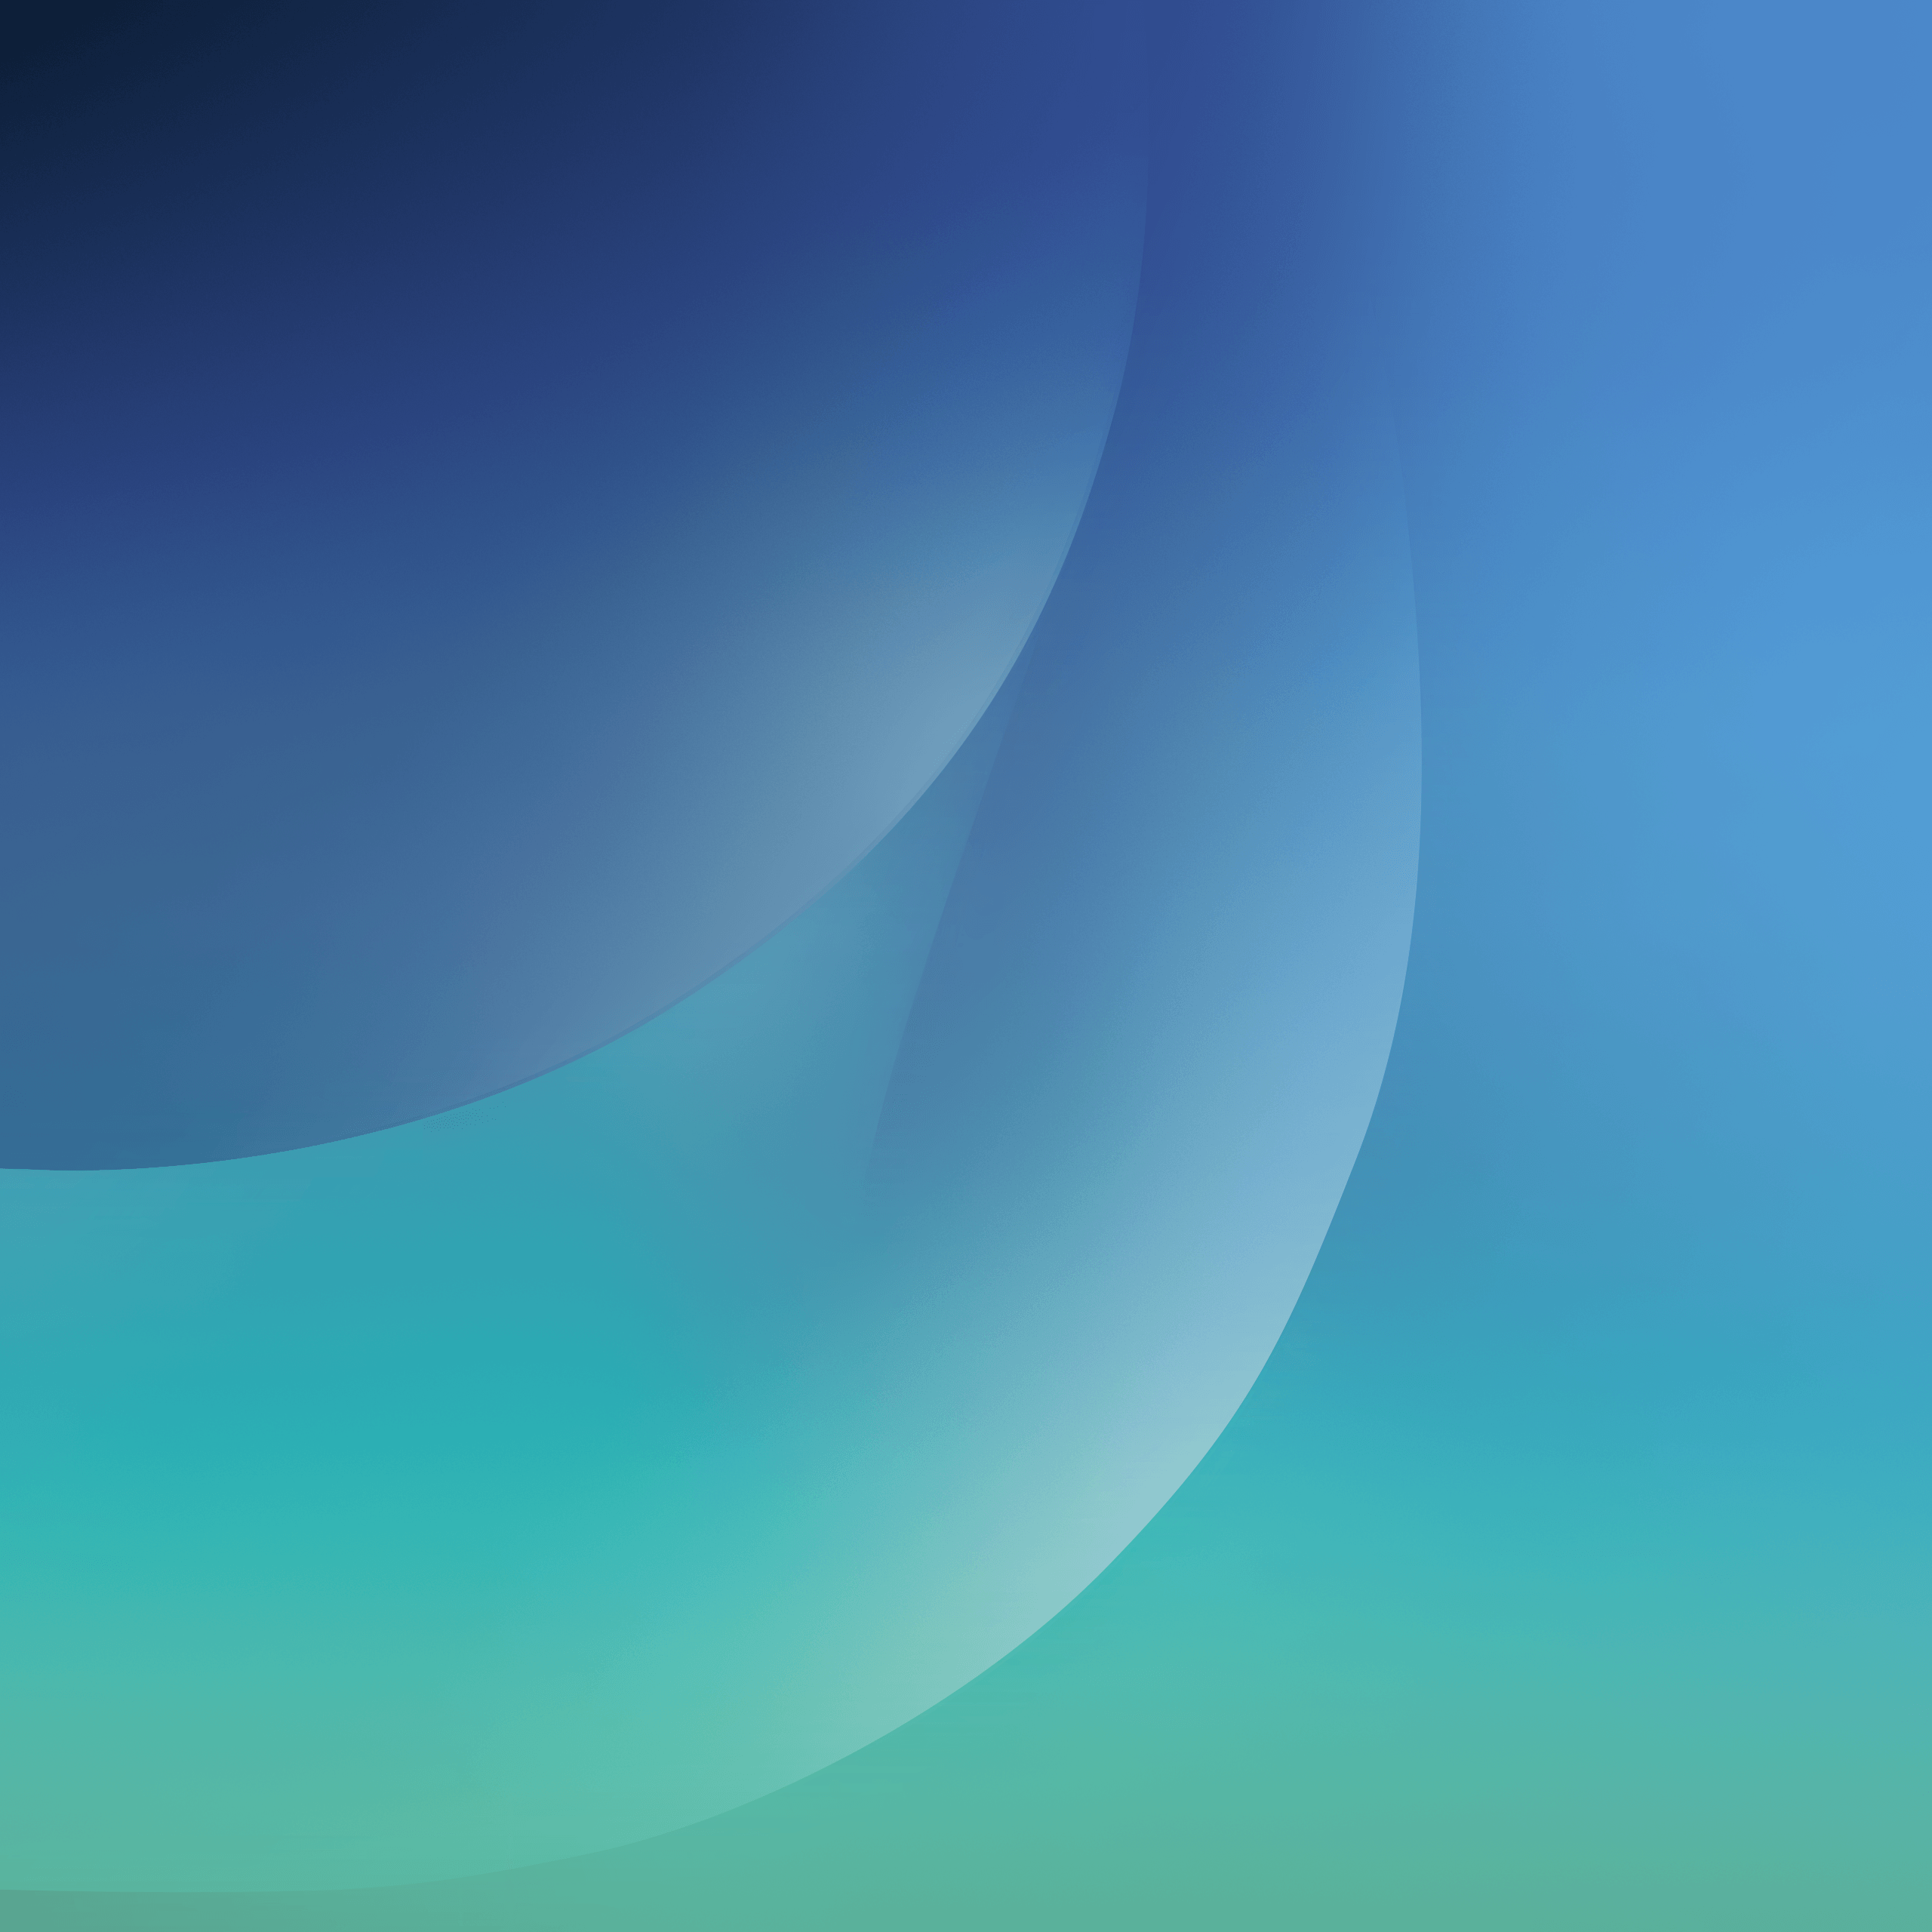 Here are 6 high resolution stock wallpaper from the Samsung